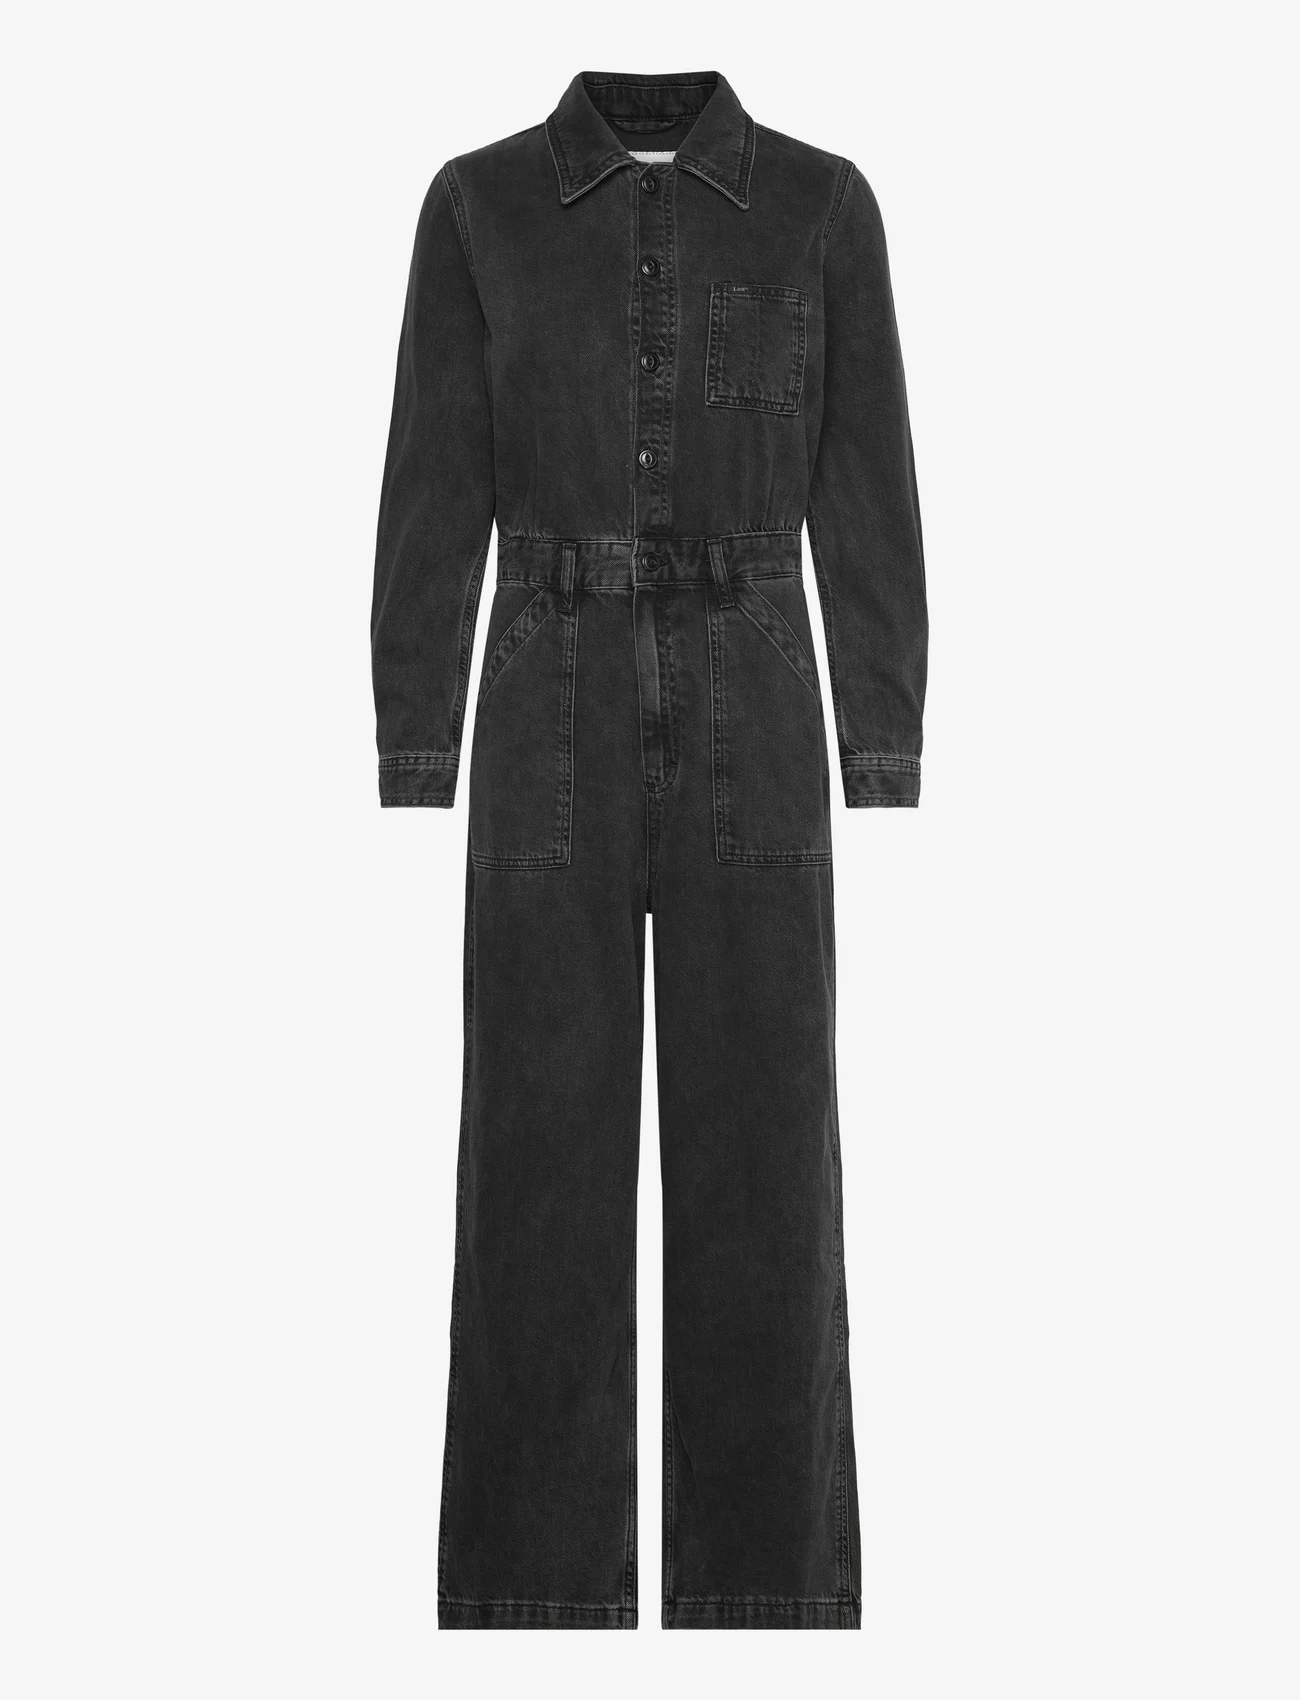 Lee Jeans - WORKWEAR UNIONALL - jumpsuits - into the shadow - 0